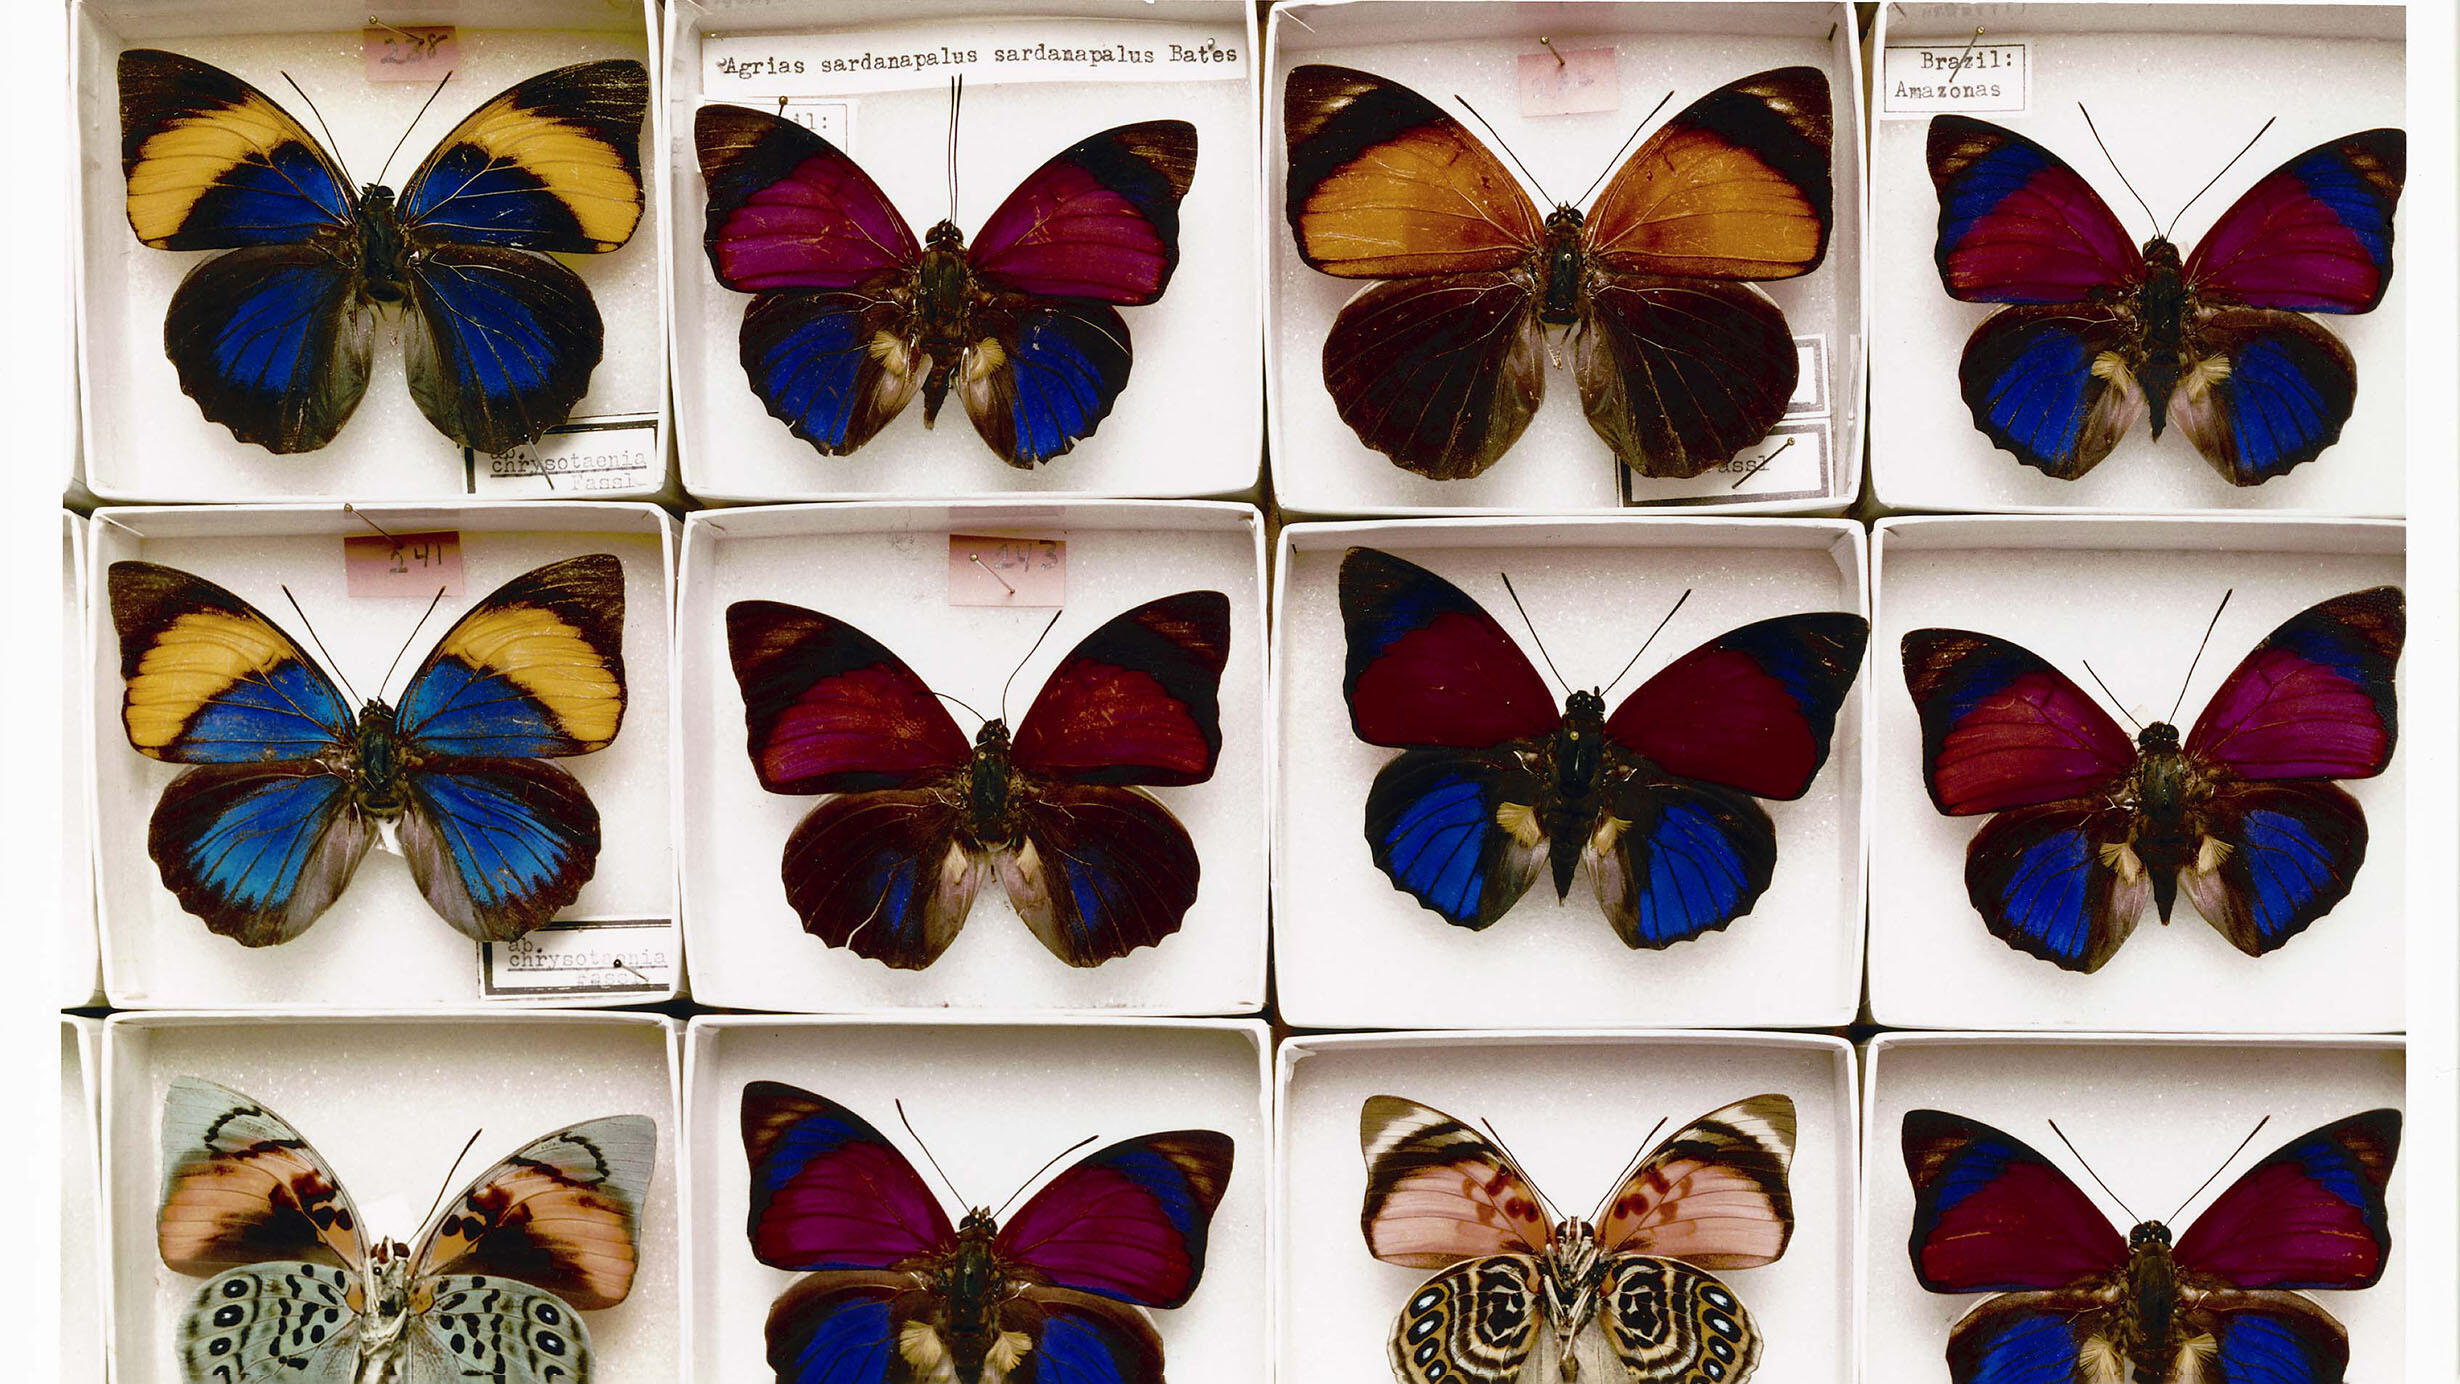  Twelve multi-colored butterfly specimens in rows of four, each housed in a small box.